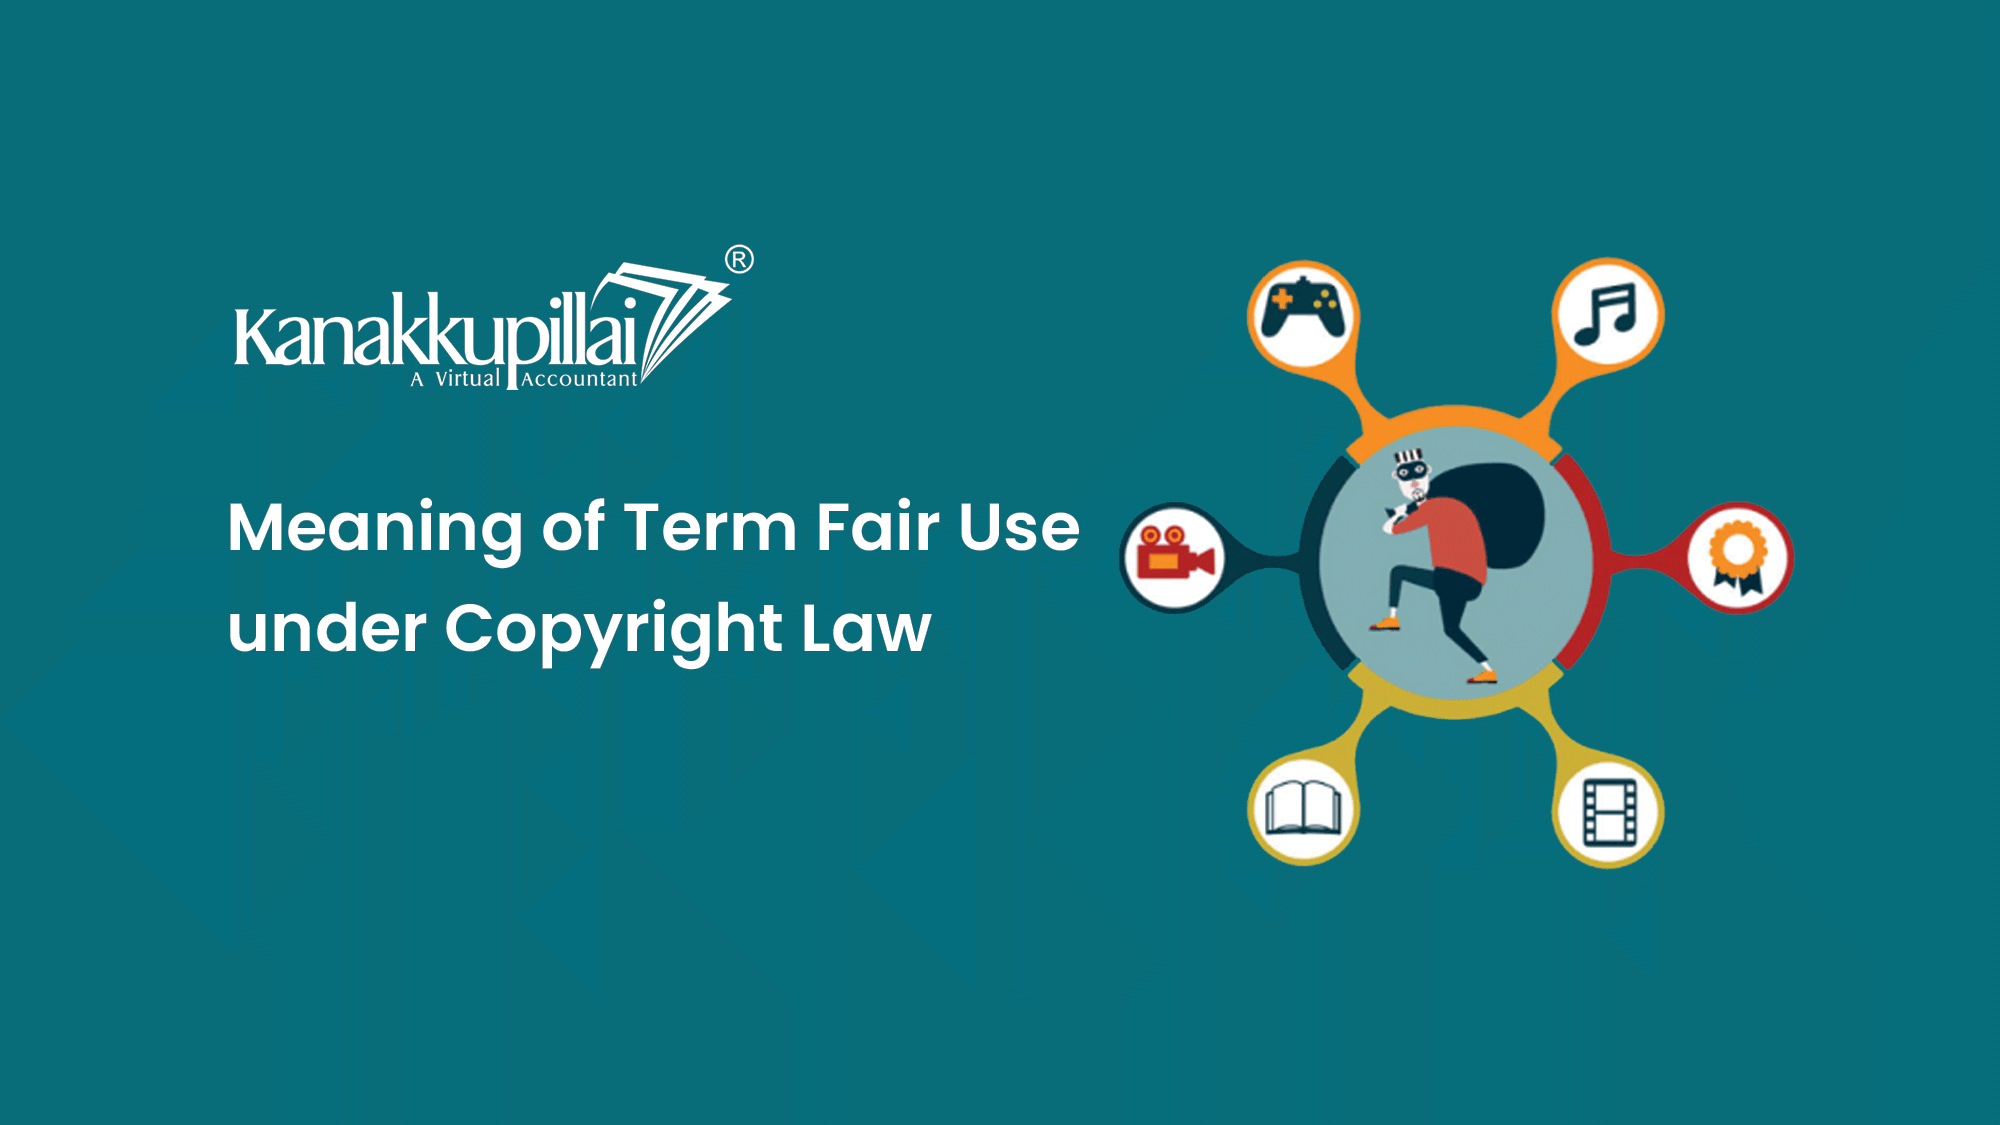 Meaning of Term Fair Use under Copyright Law